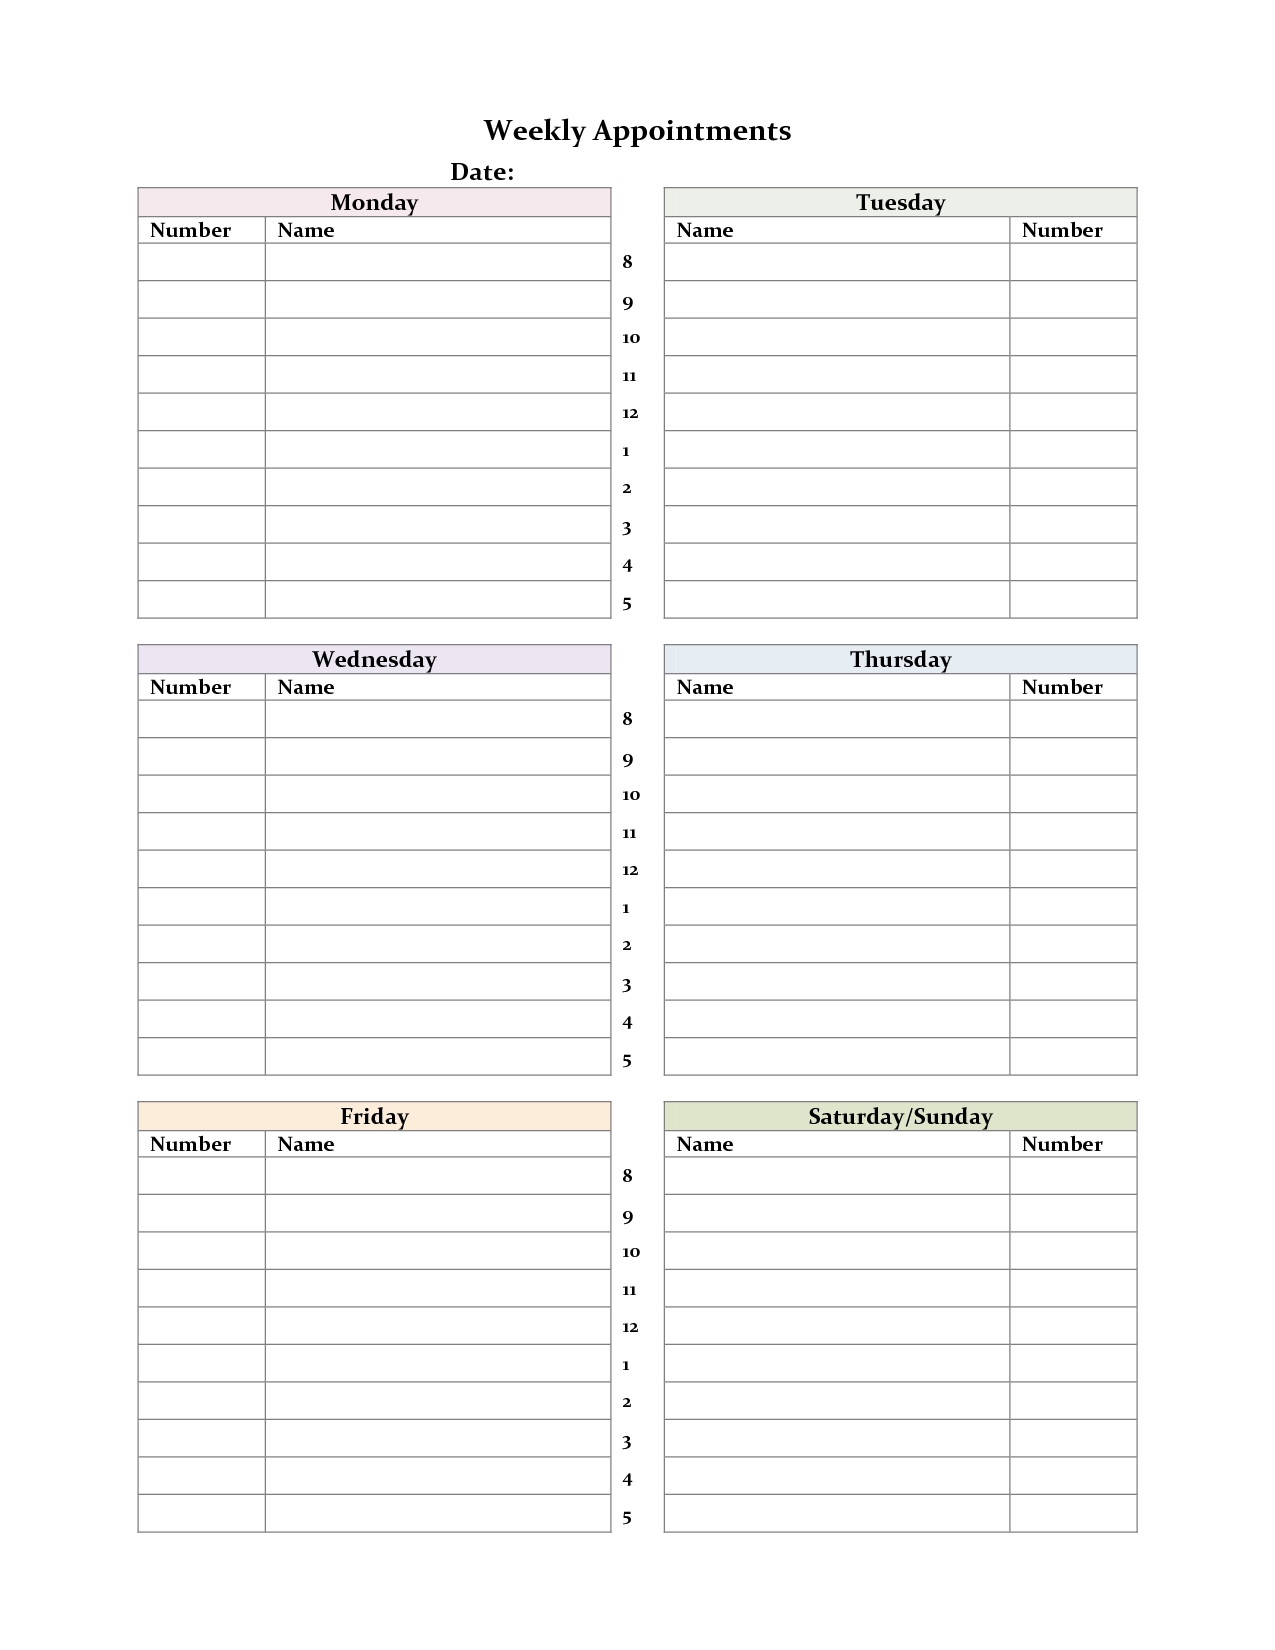 Weekly Appointment Sheet Printout | Weekly Appointment